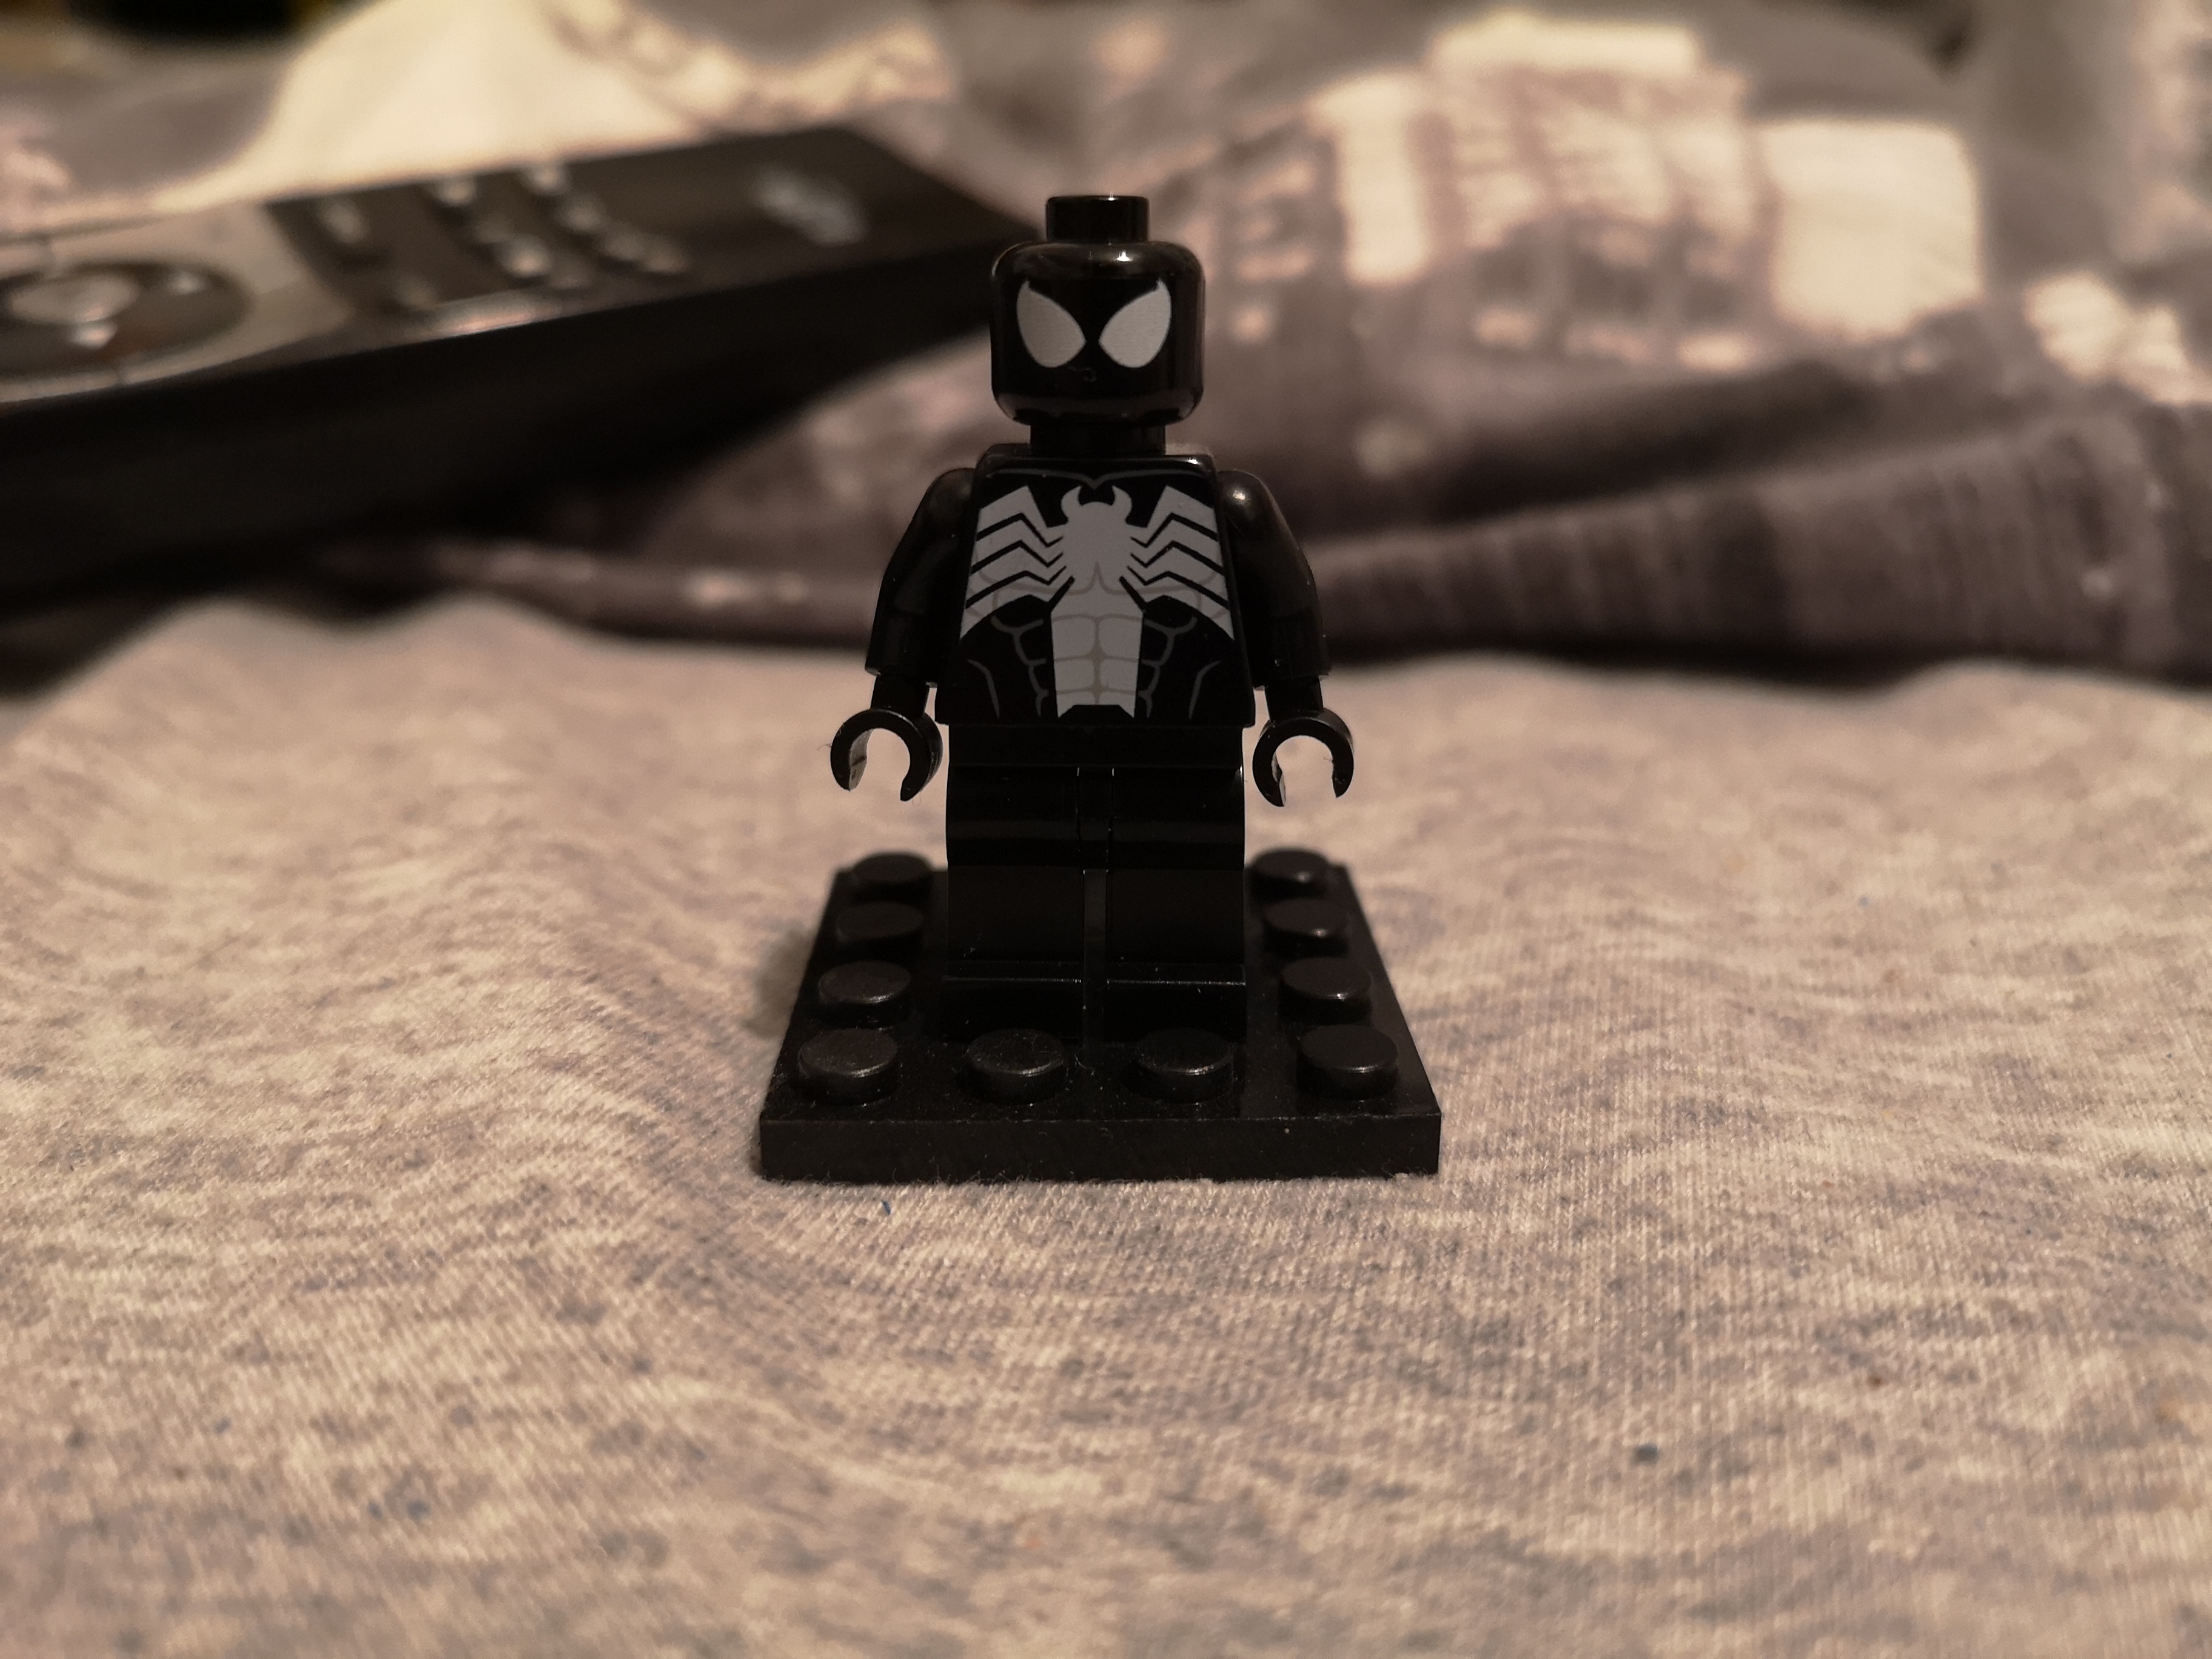 LEGO Suited Spider-Man Minifigure by Thomaslady9404 on DeviantArt